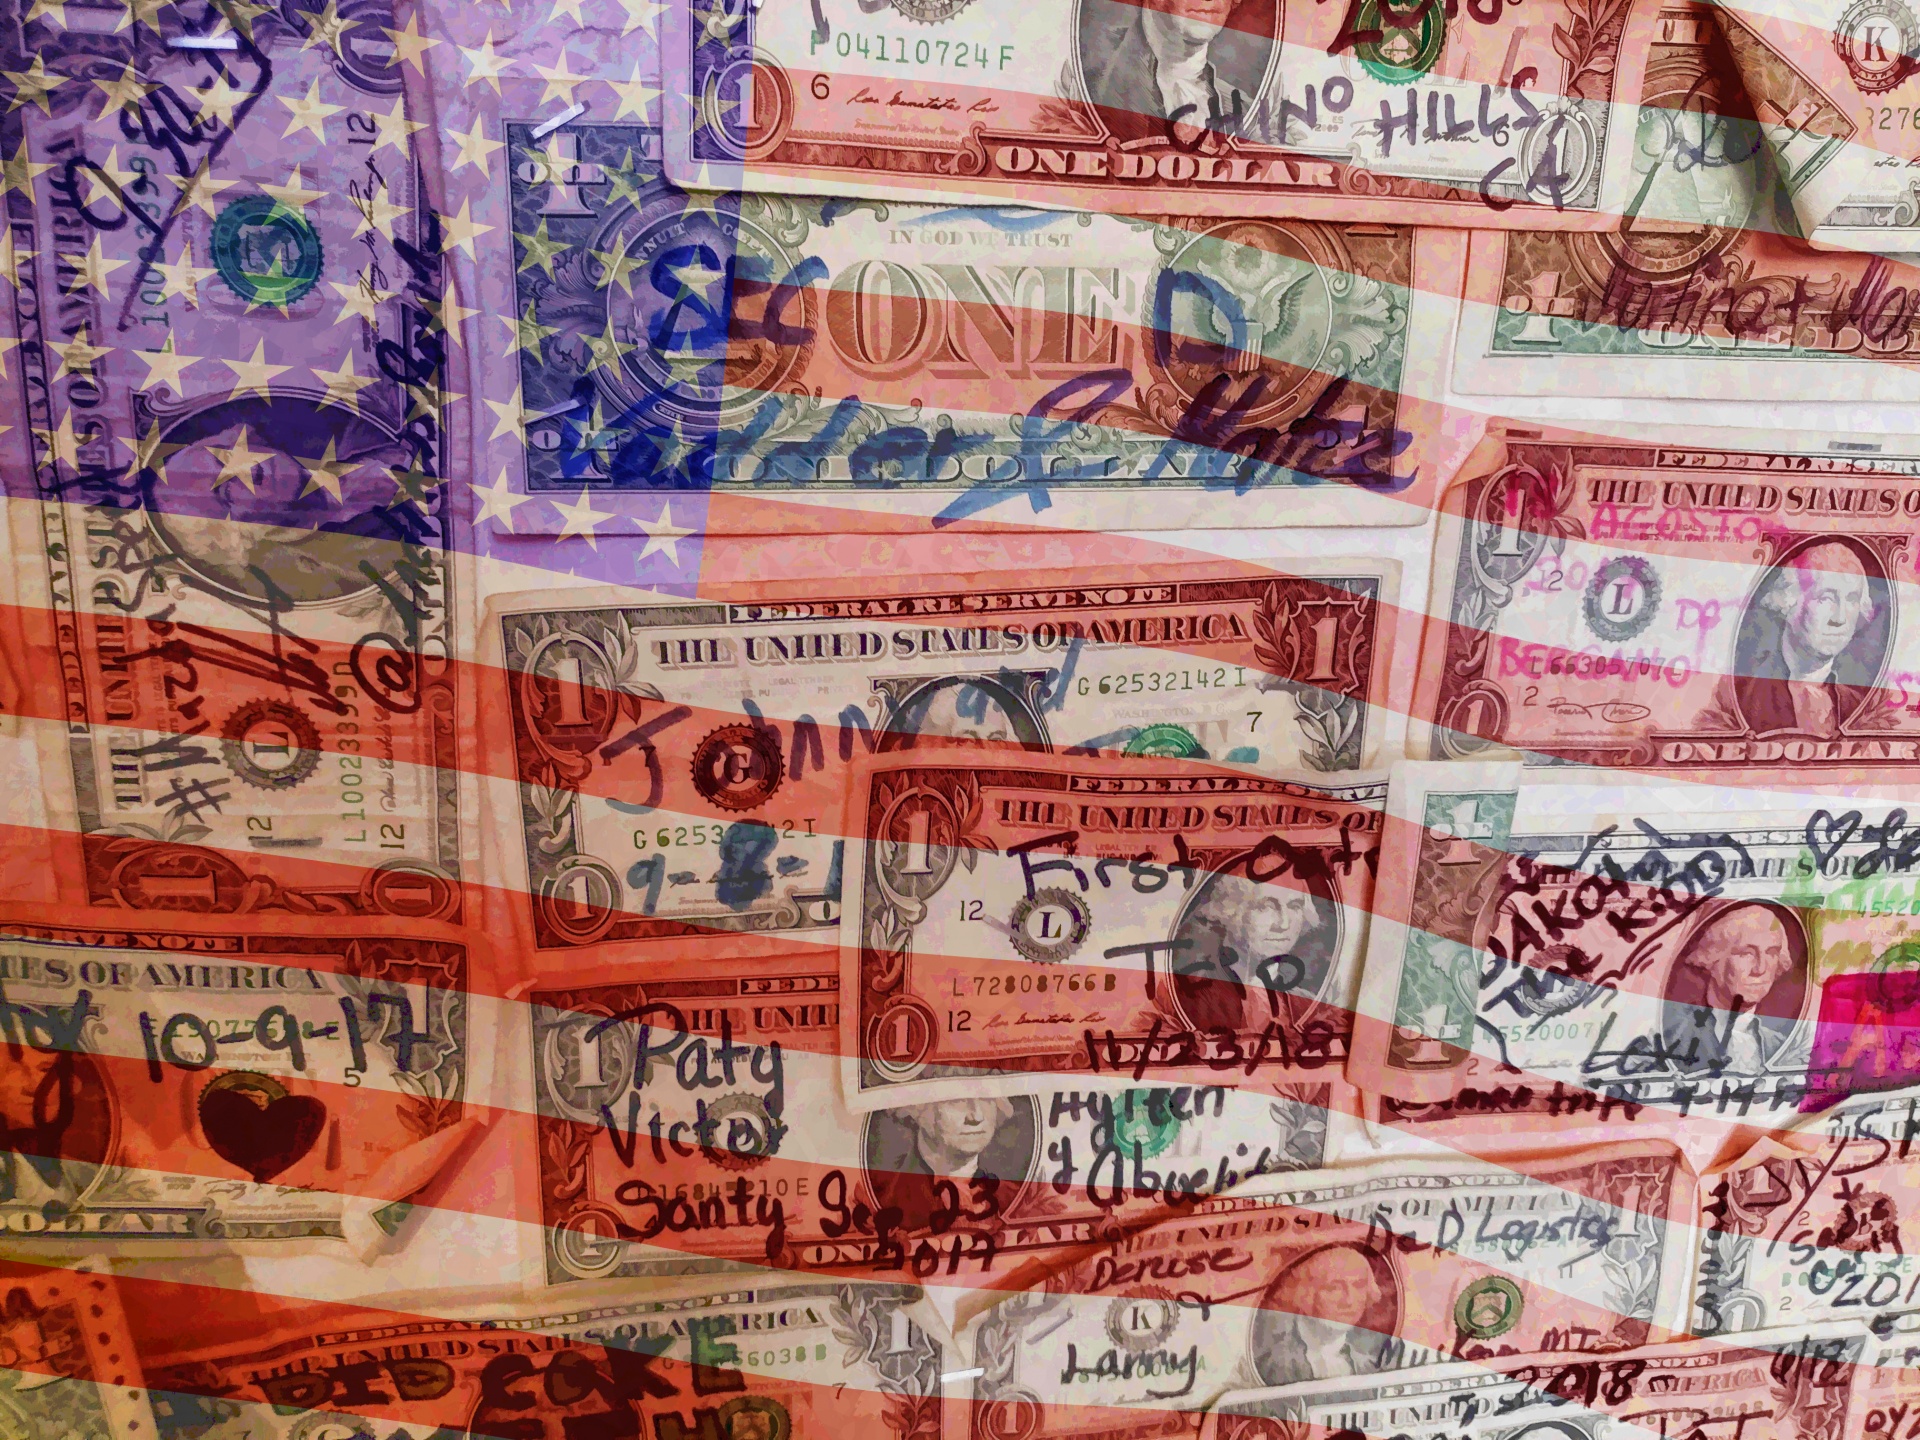 Signed dollar bills with American Flag opaque overlay